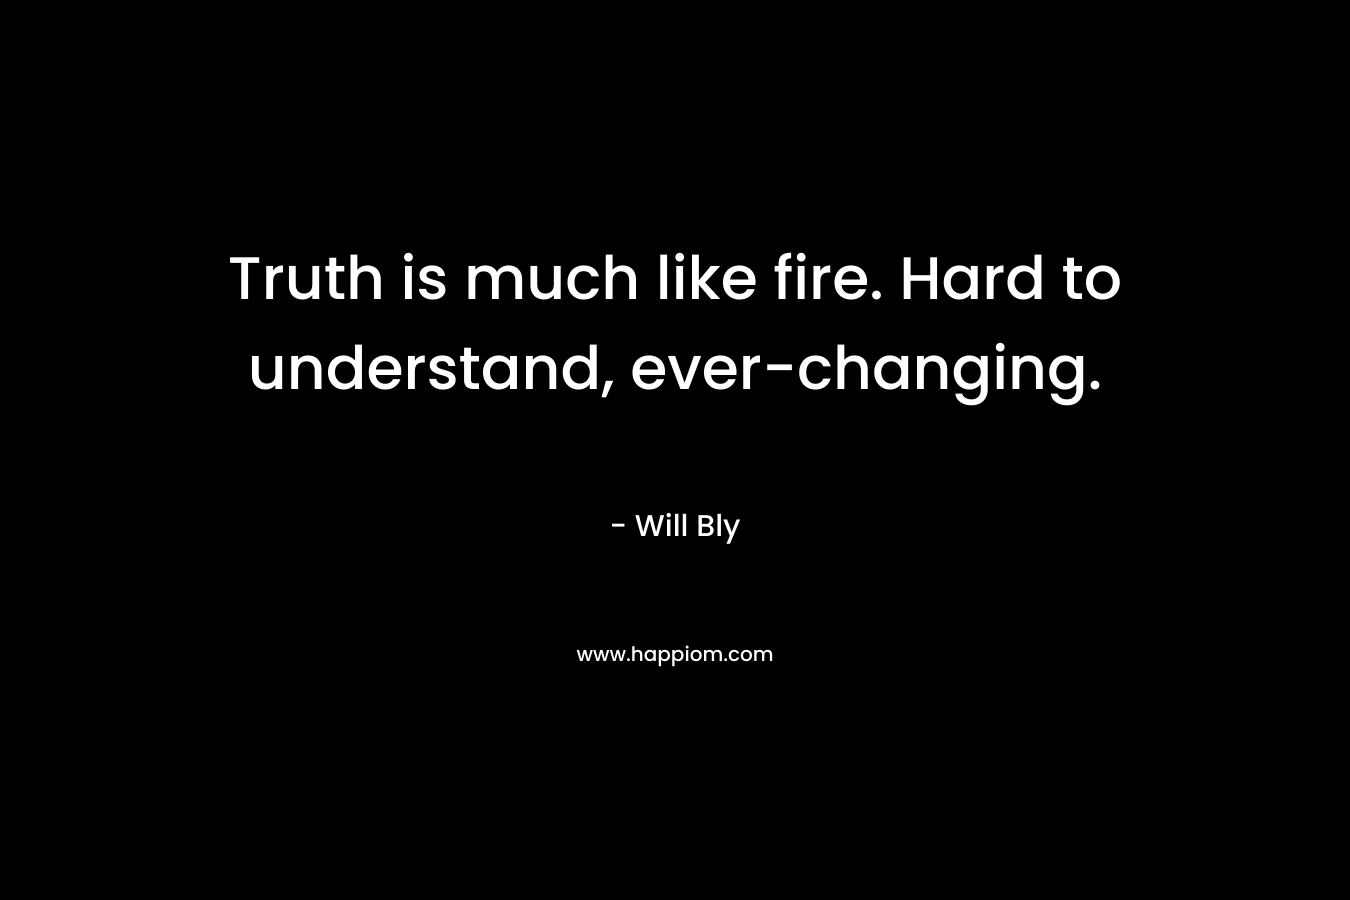 Truth is much like fire. Hard to understand, ever-changing. – Will Bly